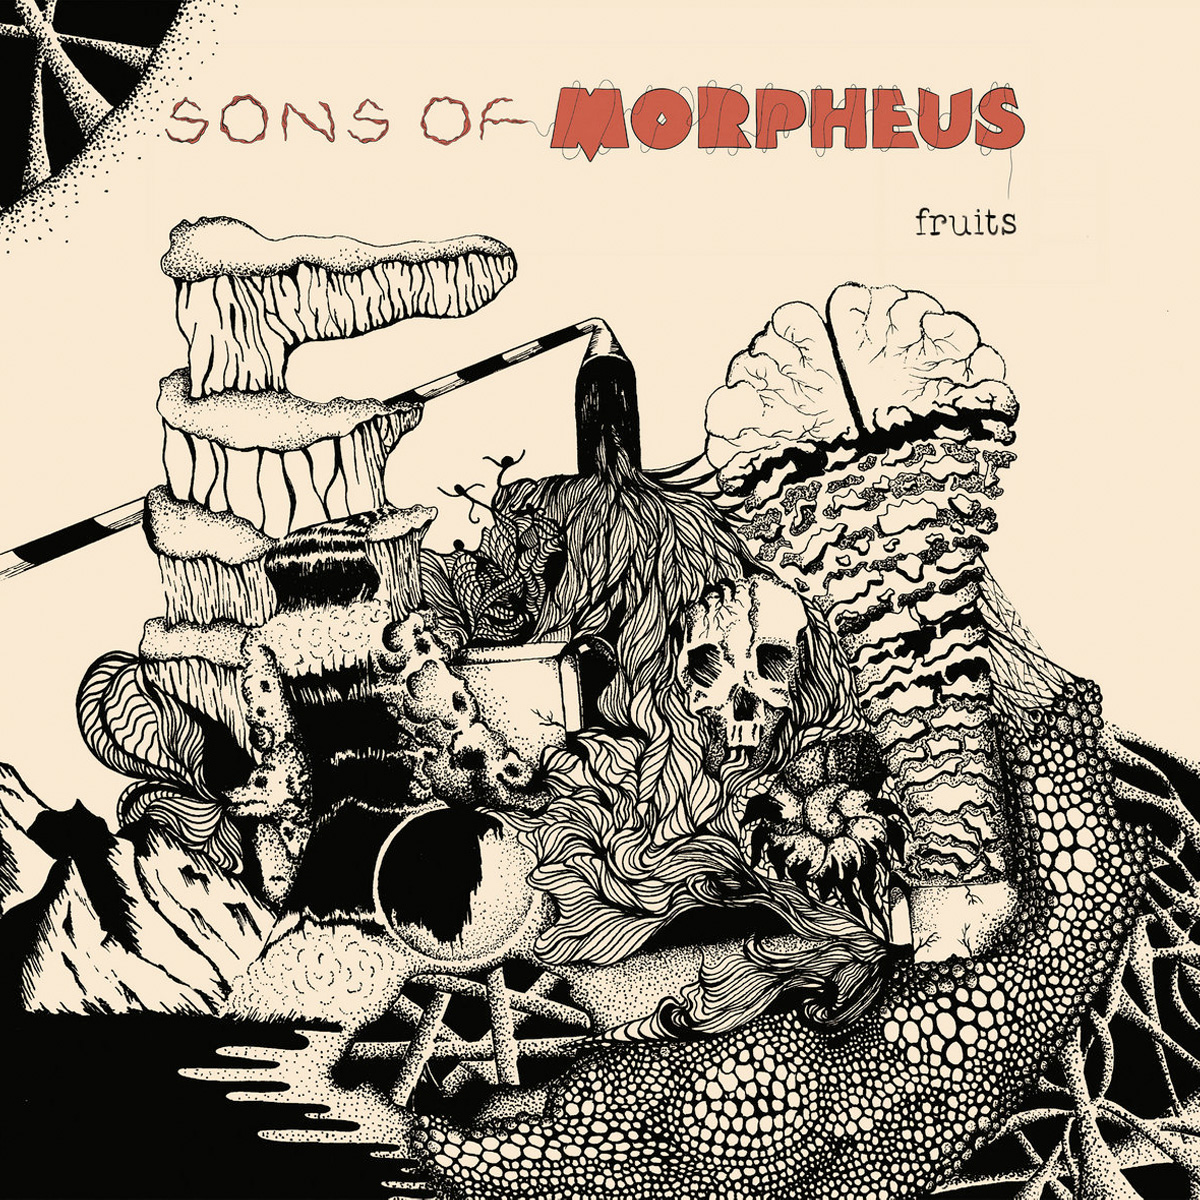 Fruits by Sons of Morpheus